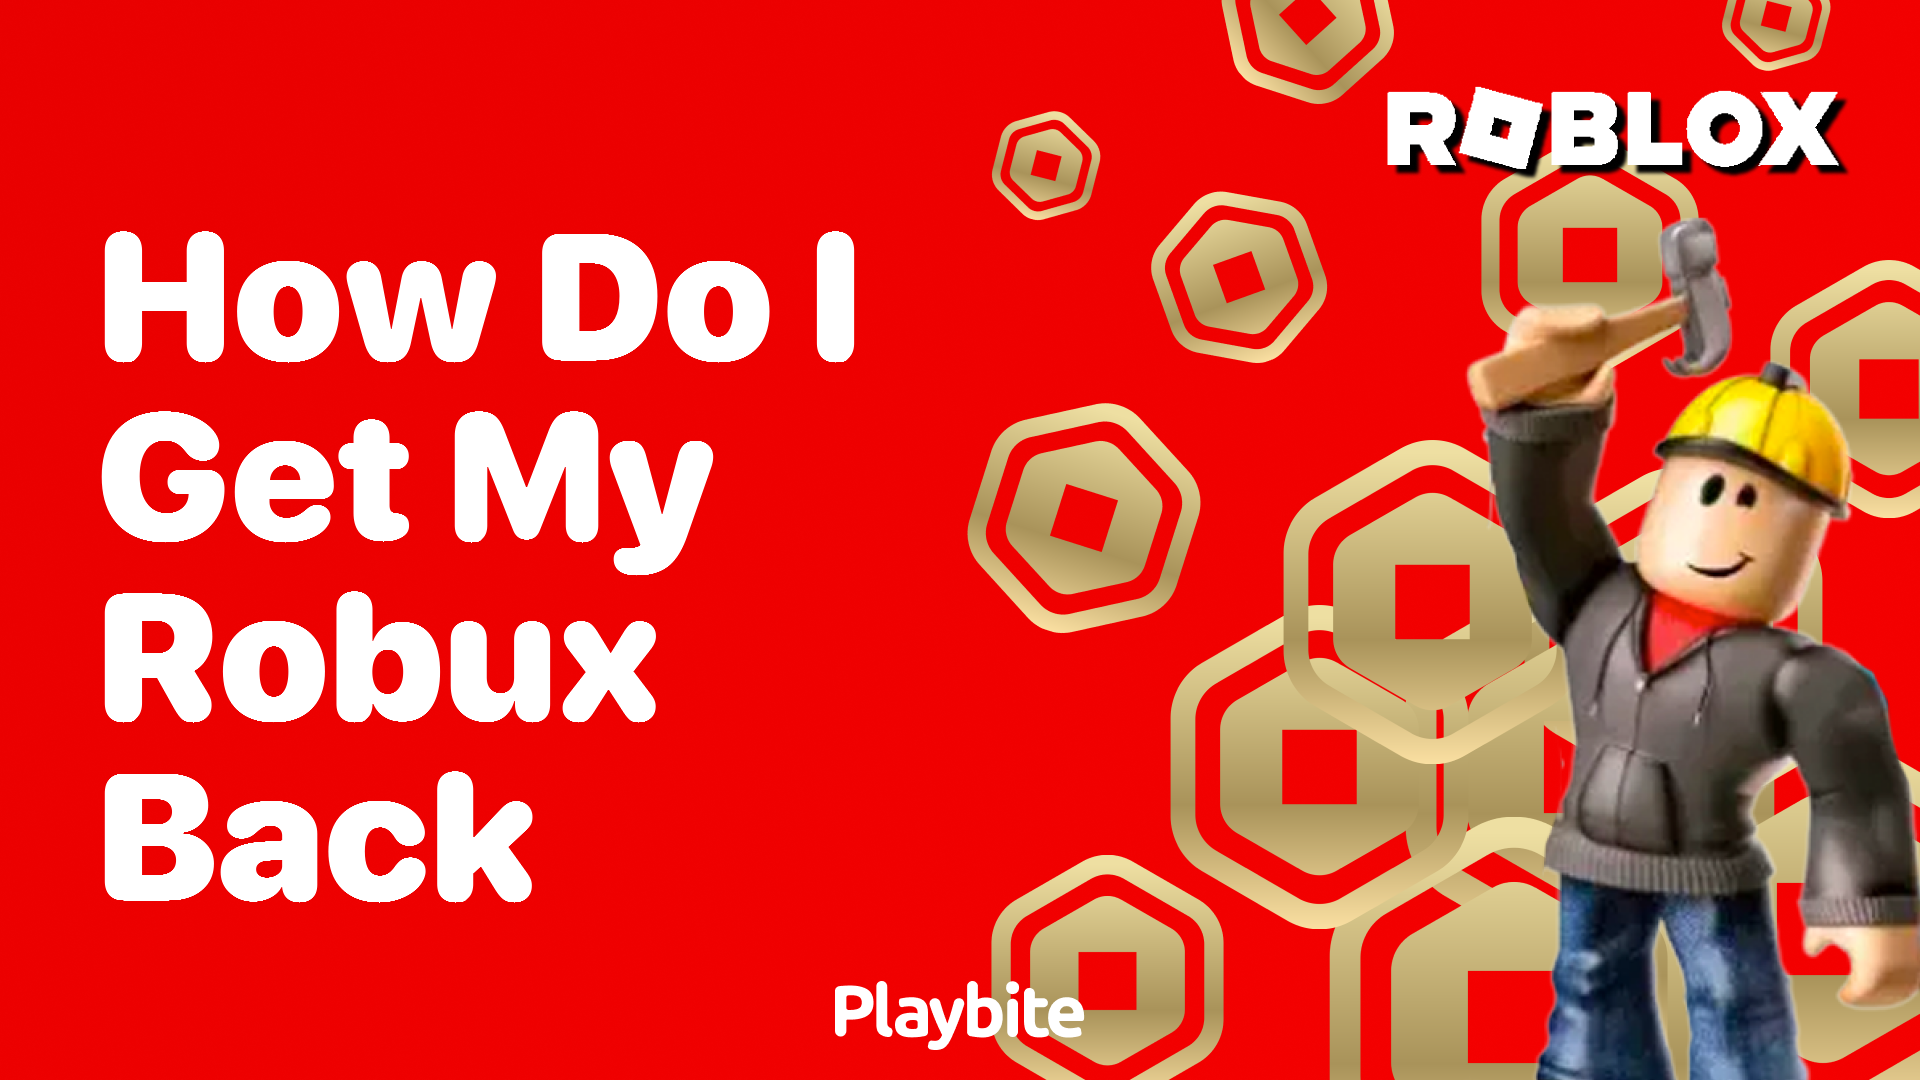 How Do I Get My Robux Back? A Quick Guide